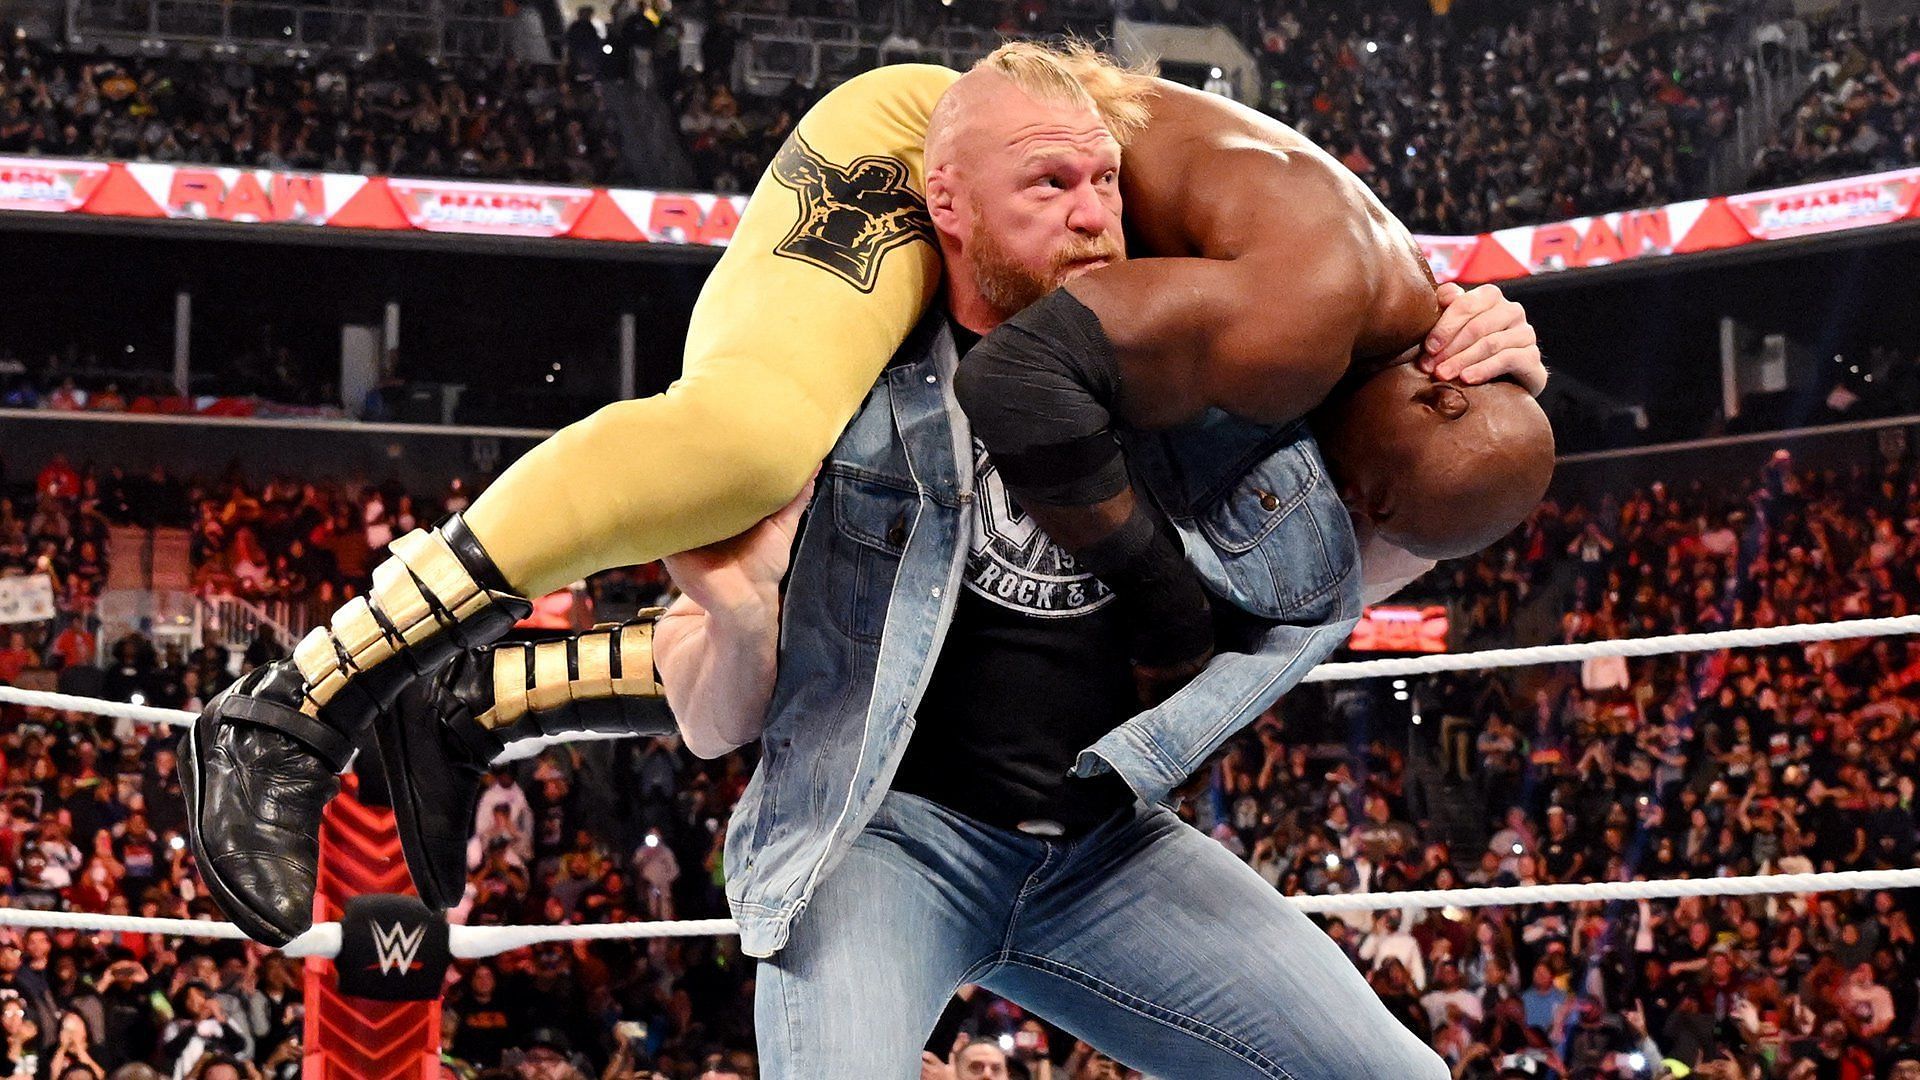 Brock Lesnar in the midst of delivering an F5 to Bobby Lashley/Credit WWE